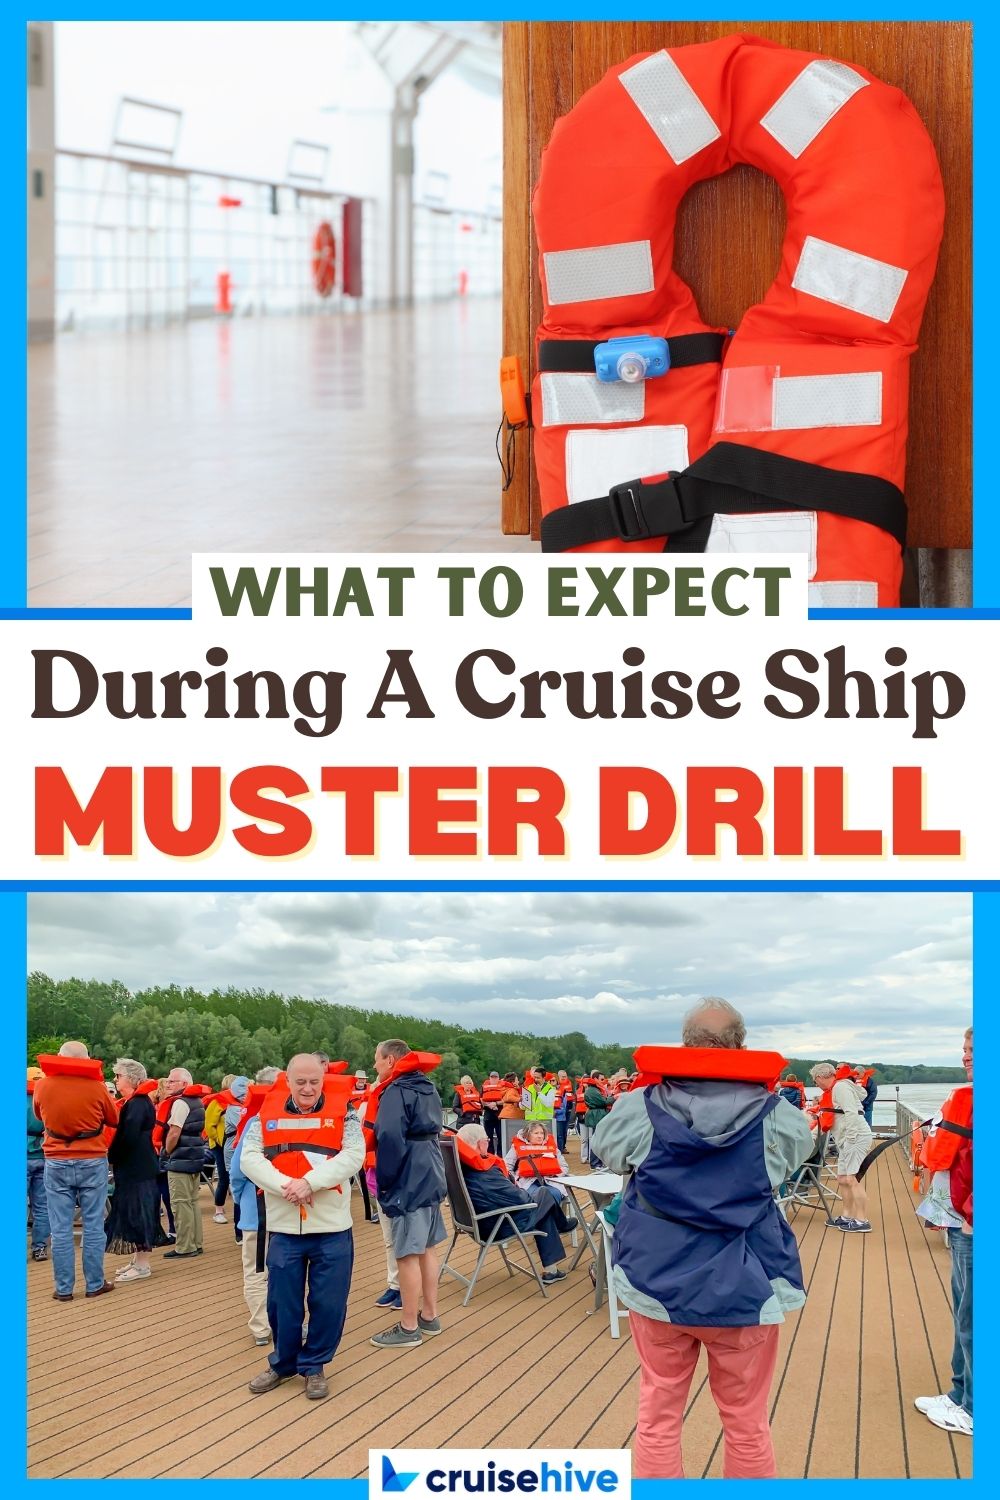 Cruise Ship Muster Drill